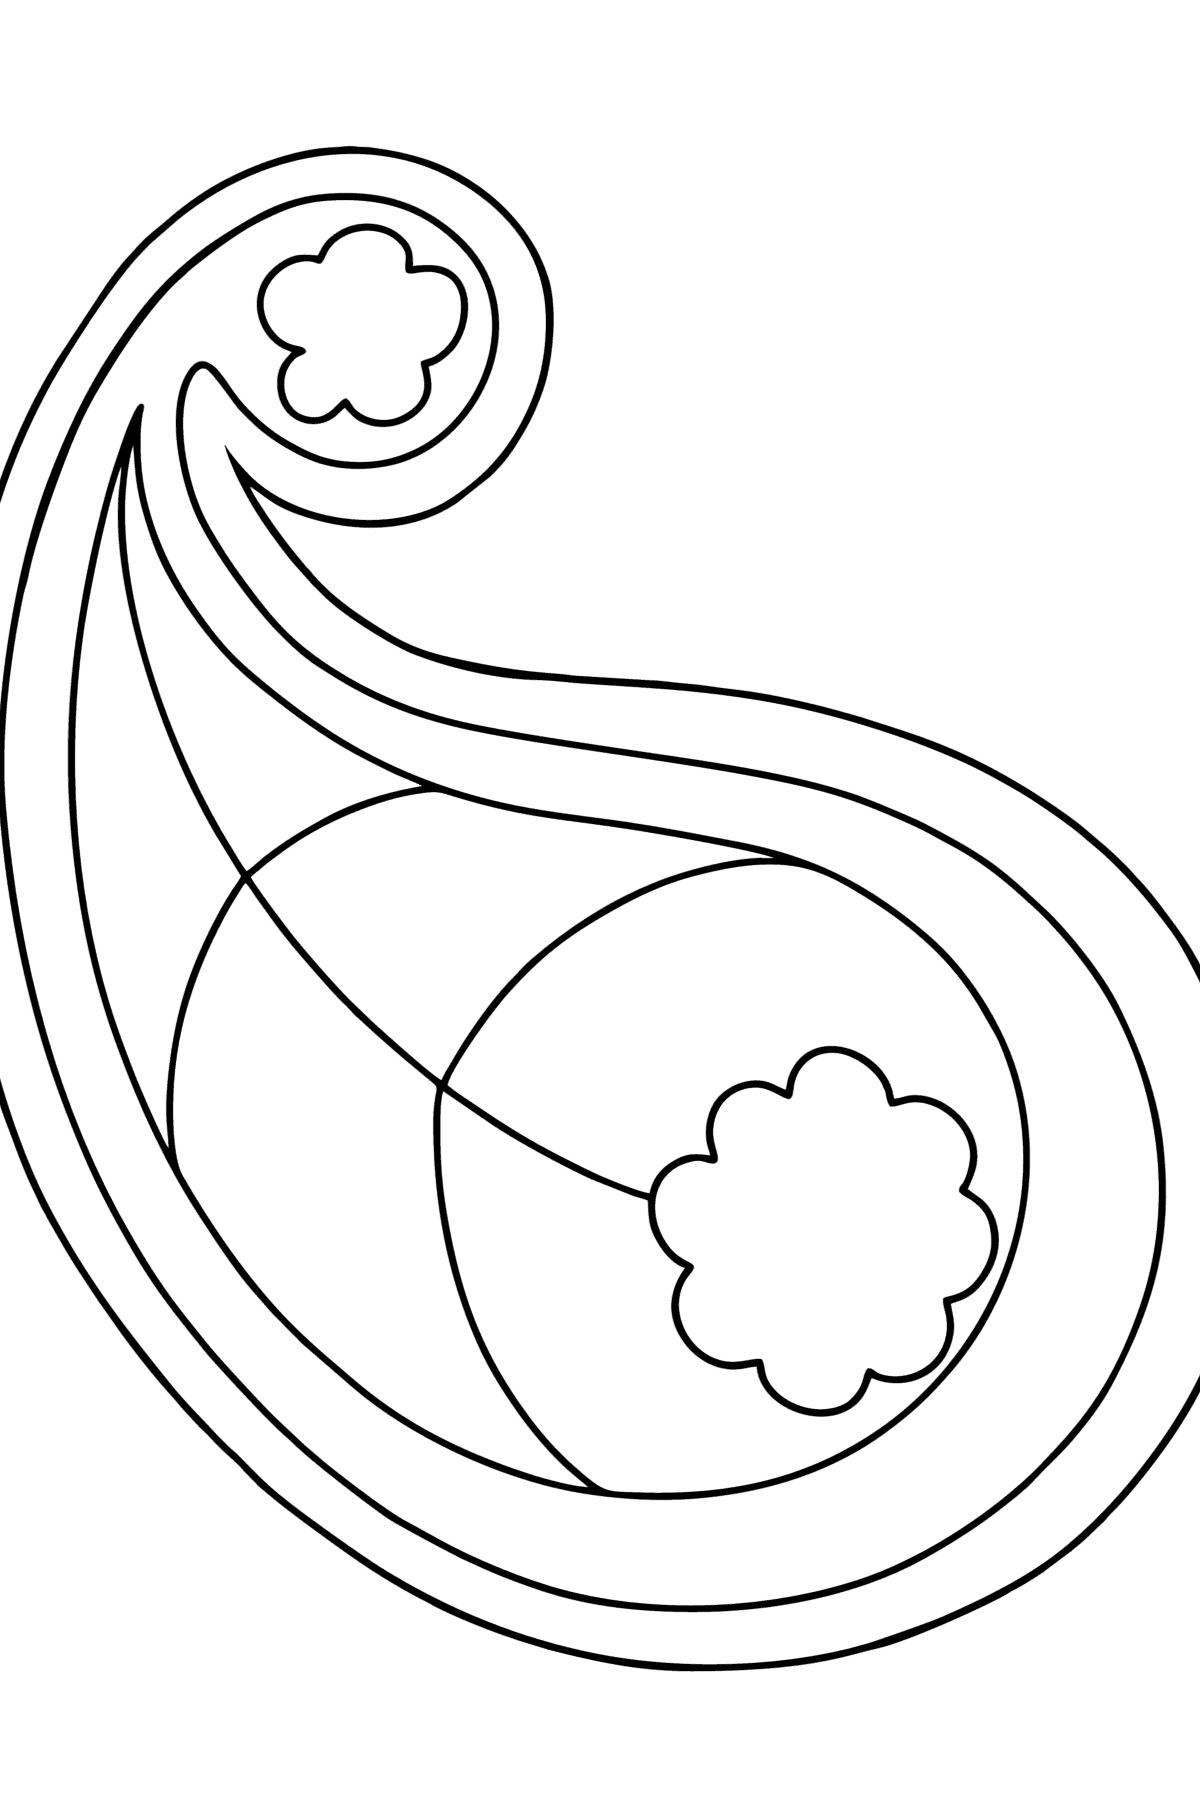 Simple Paisley coloring page - Coloring Pages for Kids